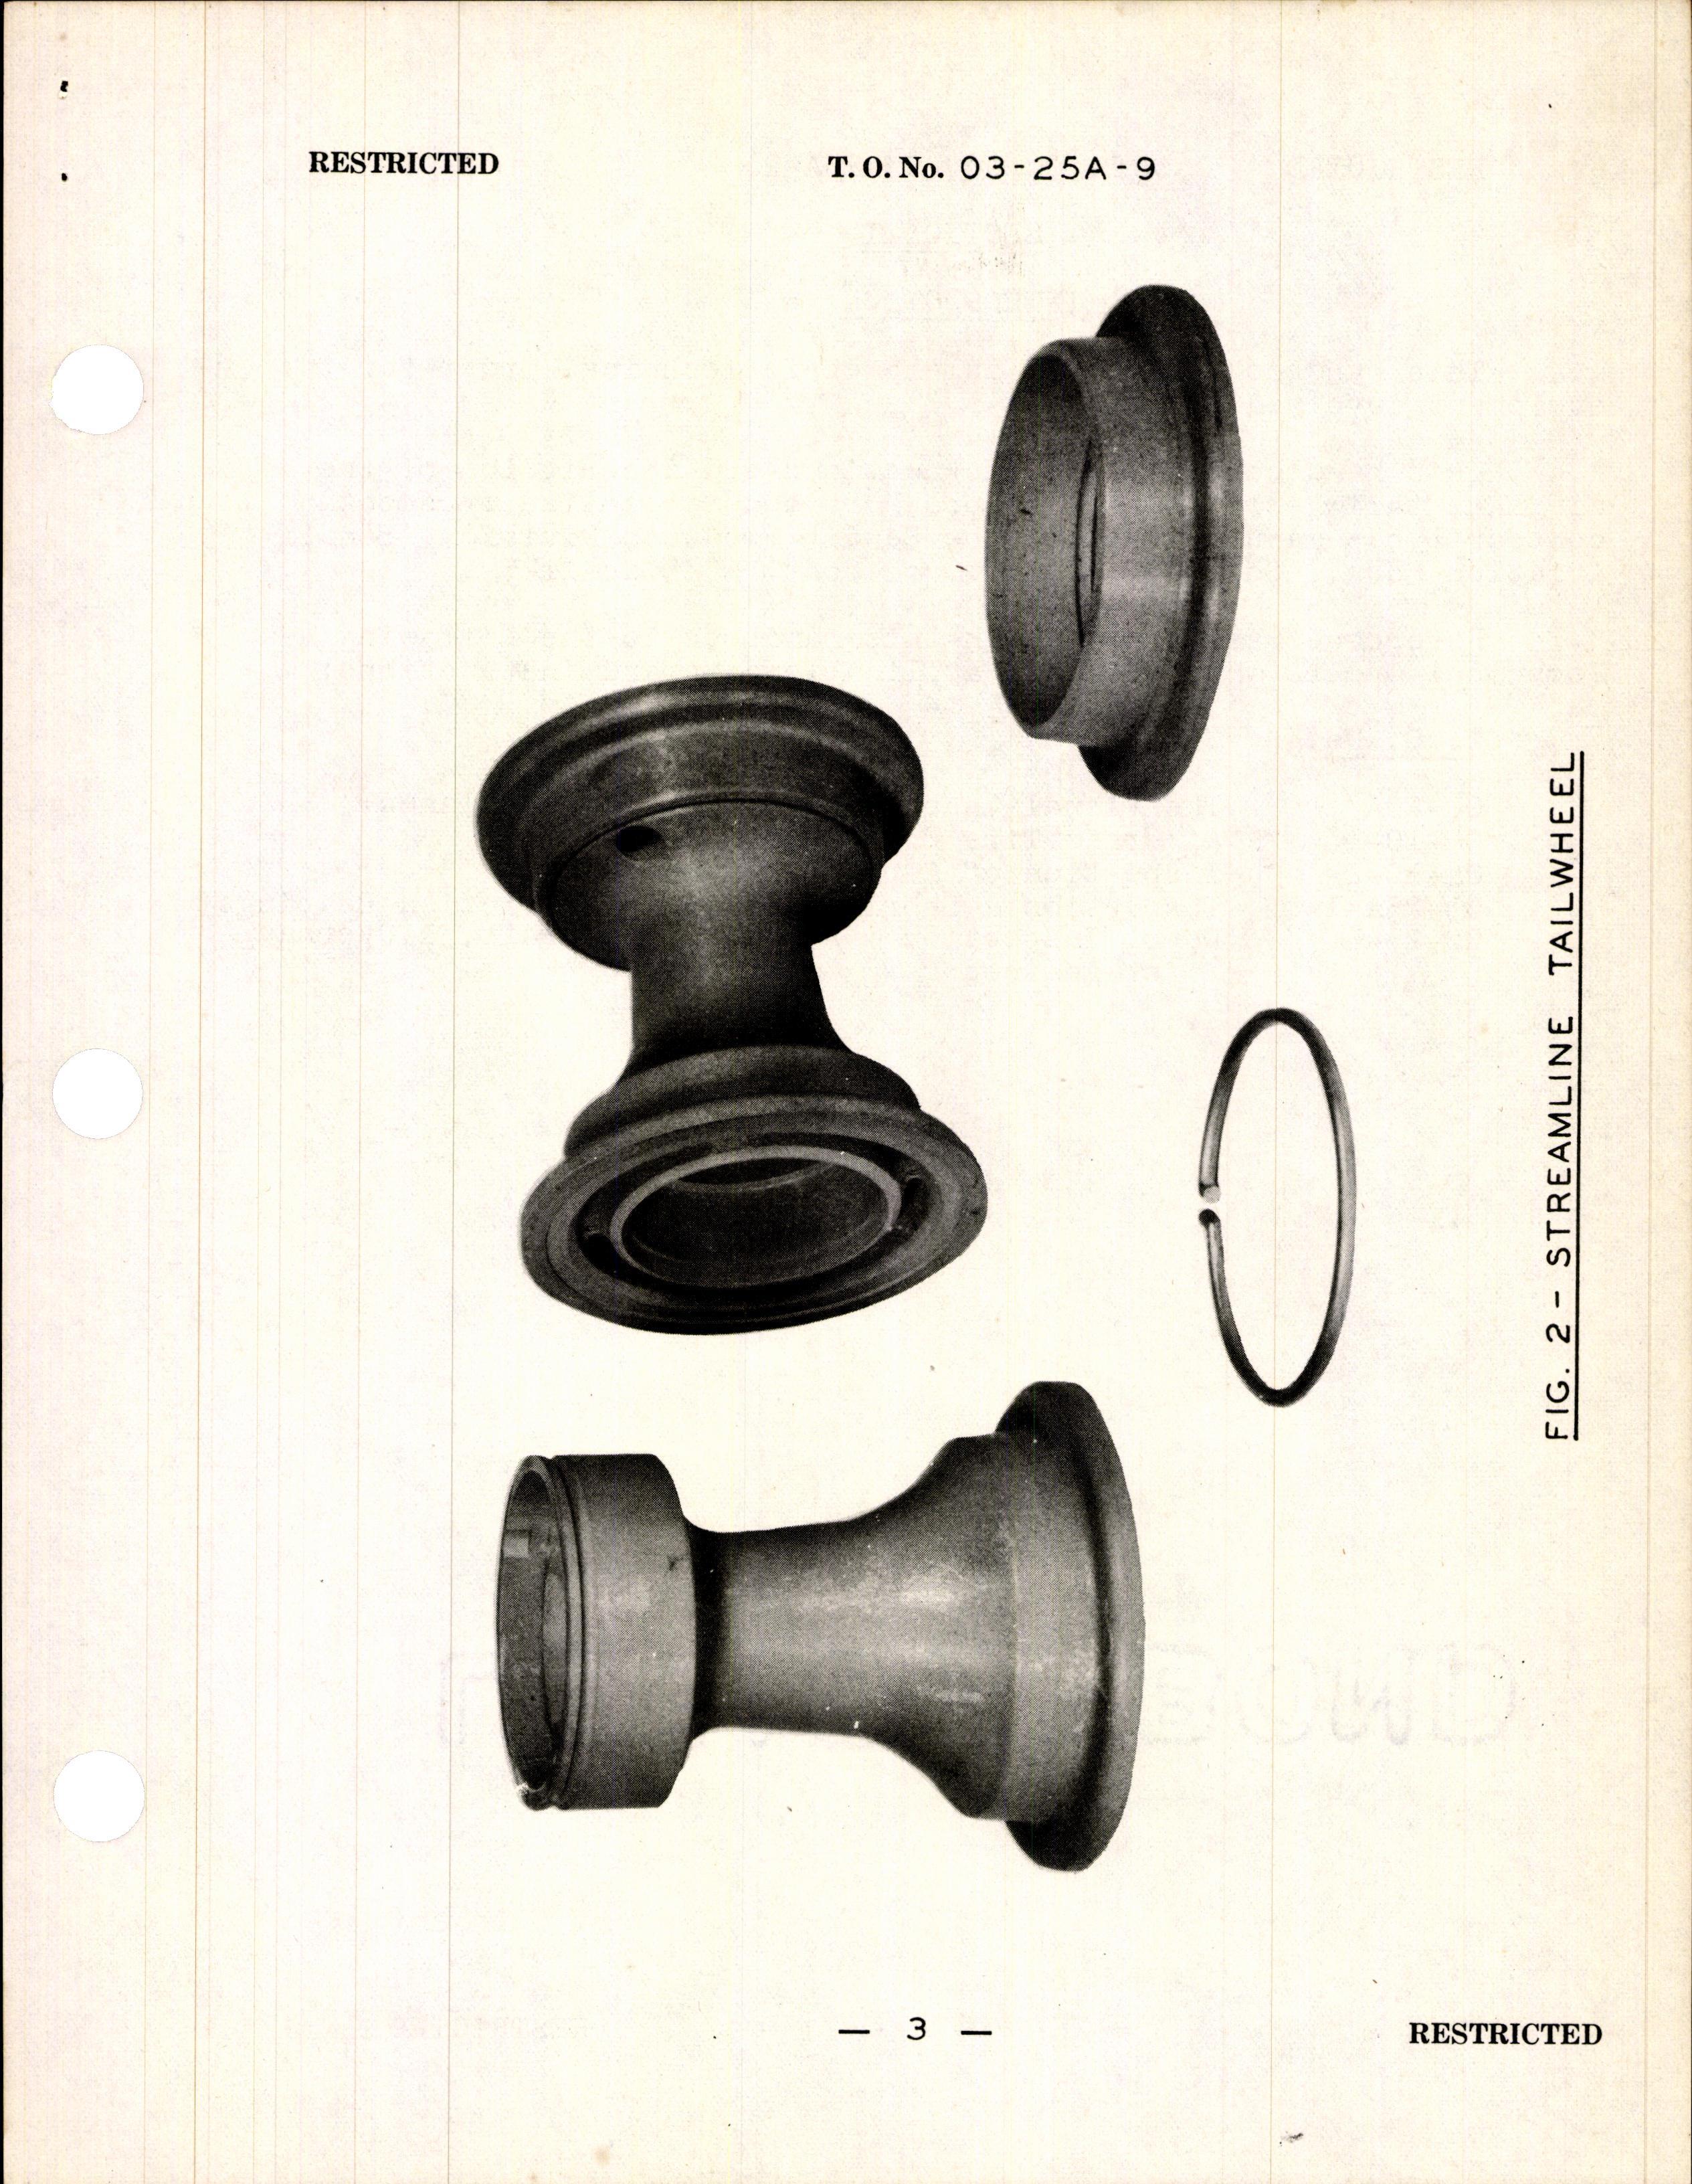 Sample page 5 from AirCorps Library document: Handbook of Instructions with Parts Catalog for Tailwheels